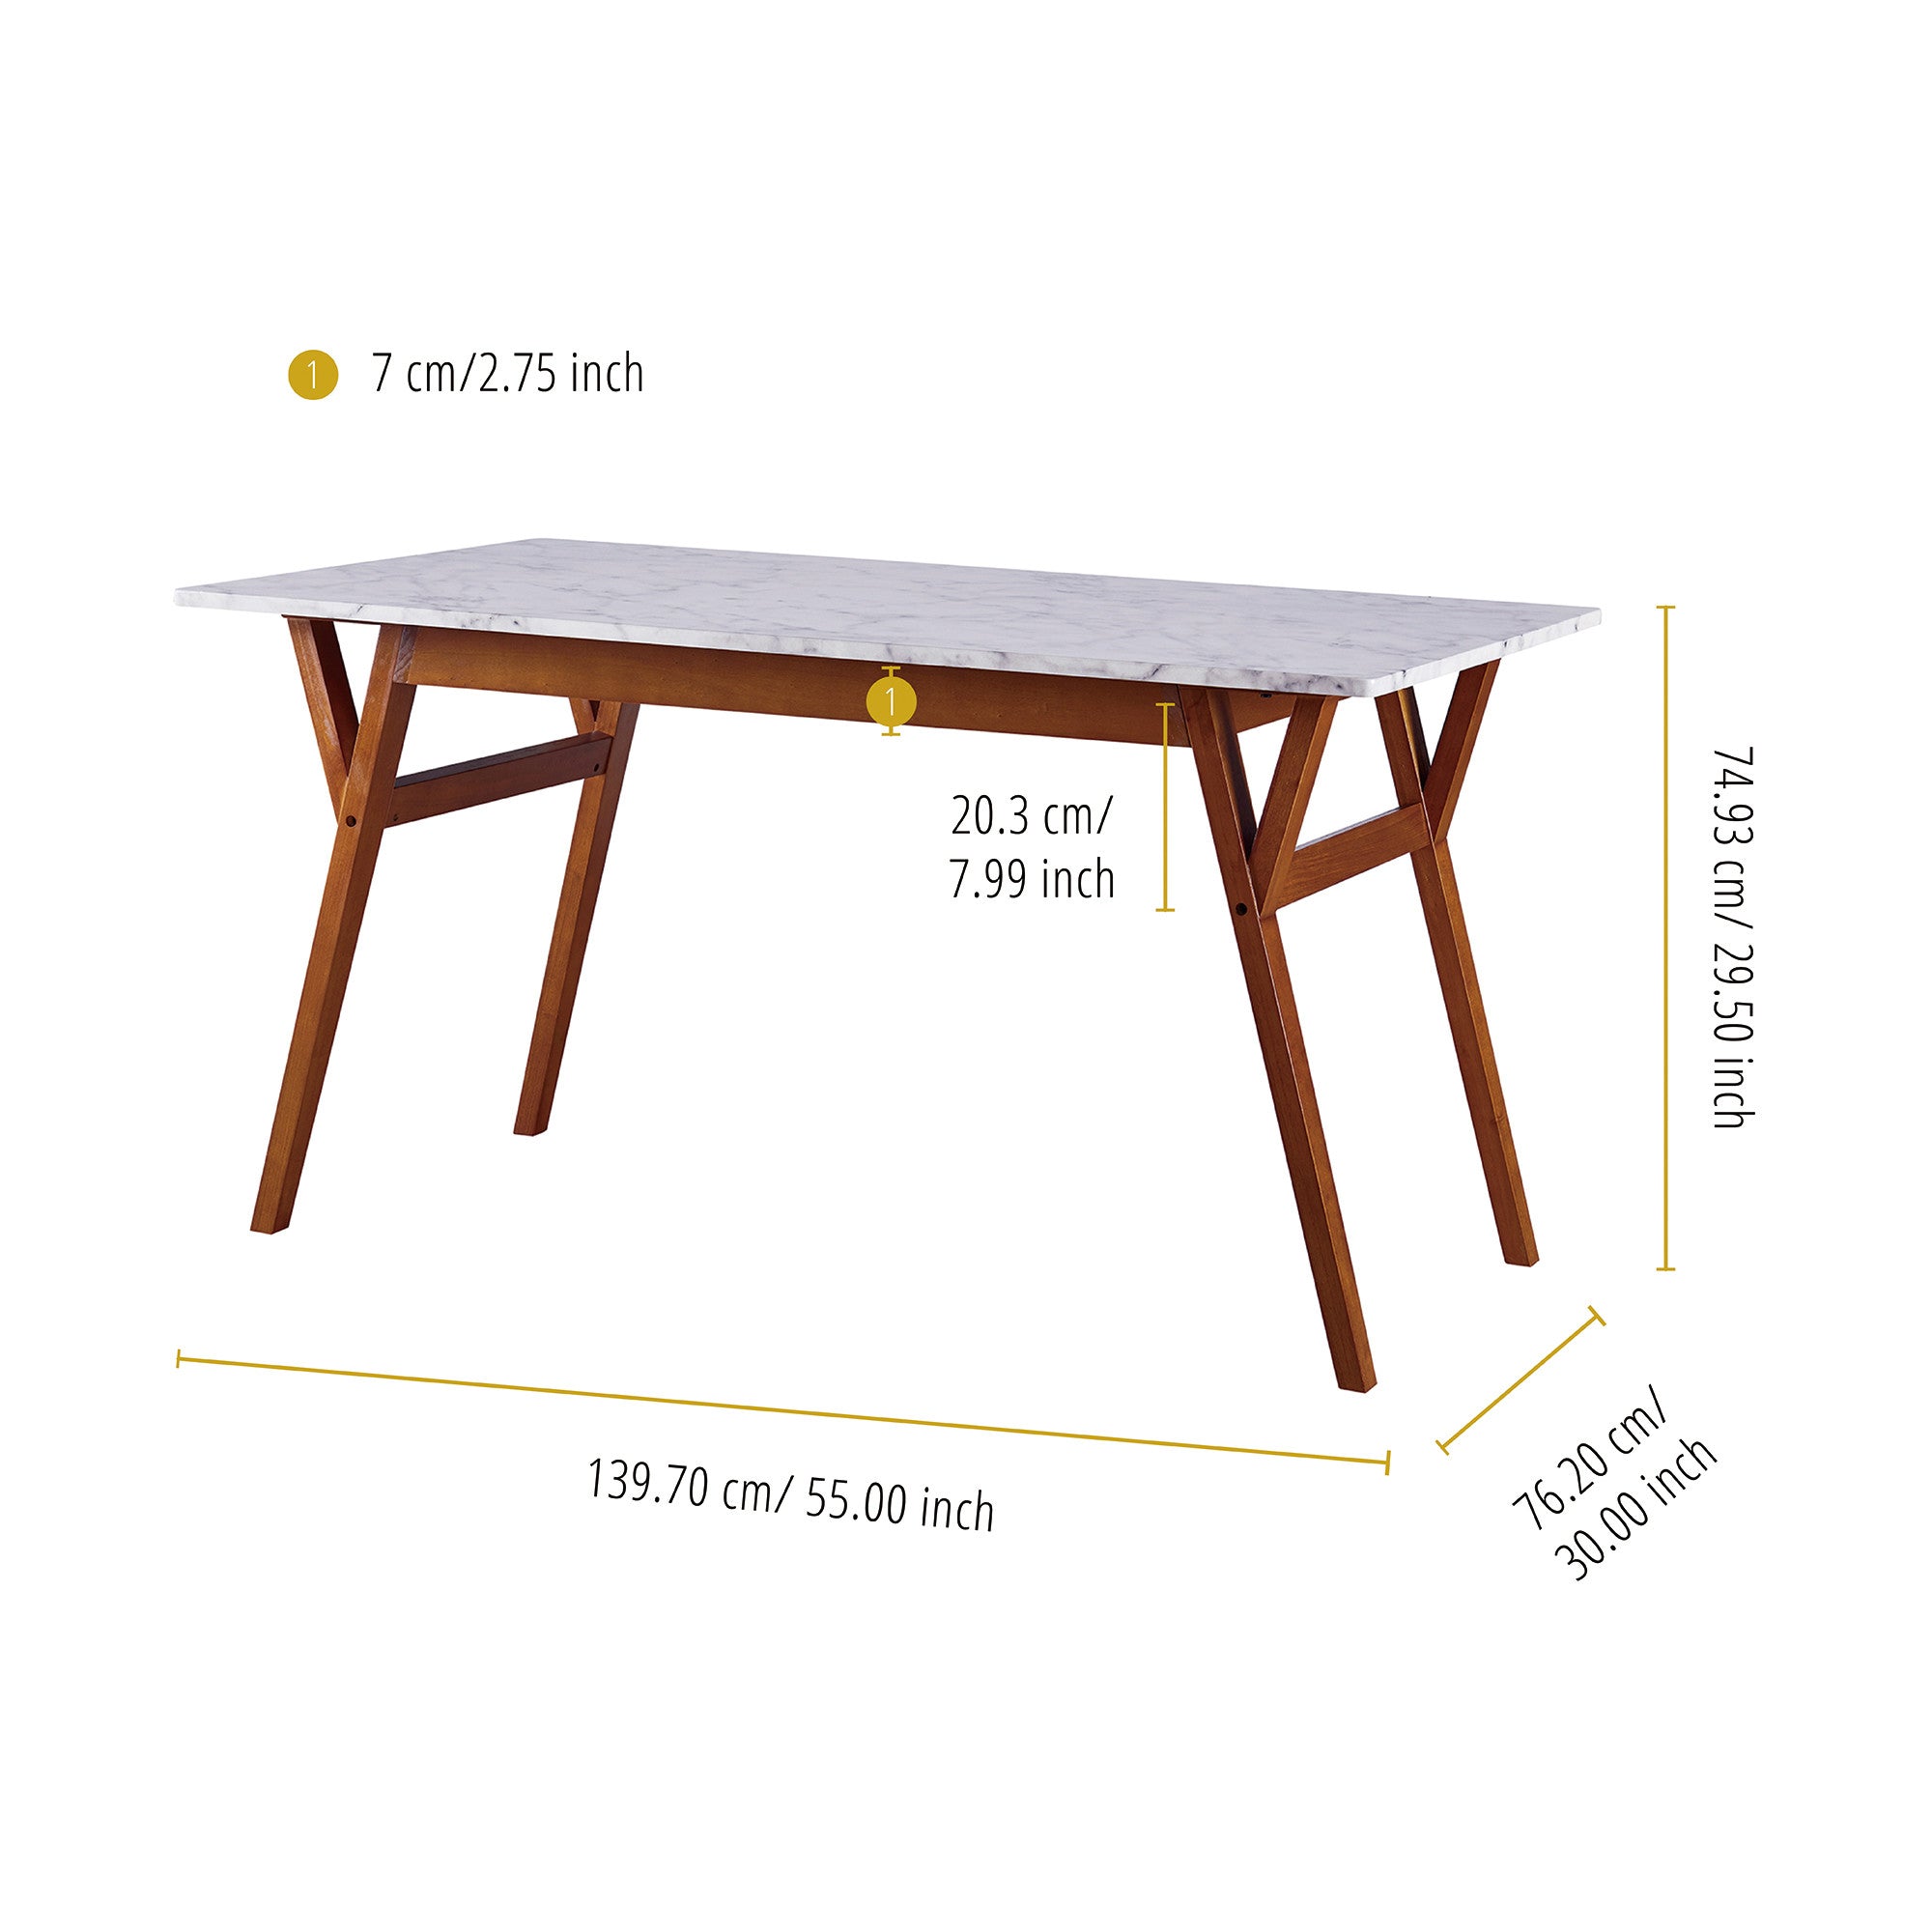 Teamson Home Ashton Rectangular Marble-Look Dining Table with Wood Base, Marble/Walnut